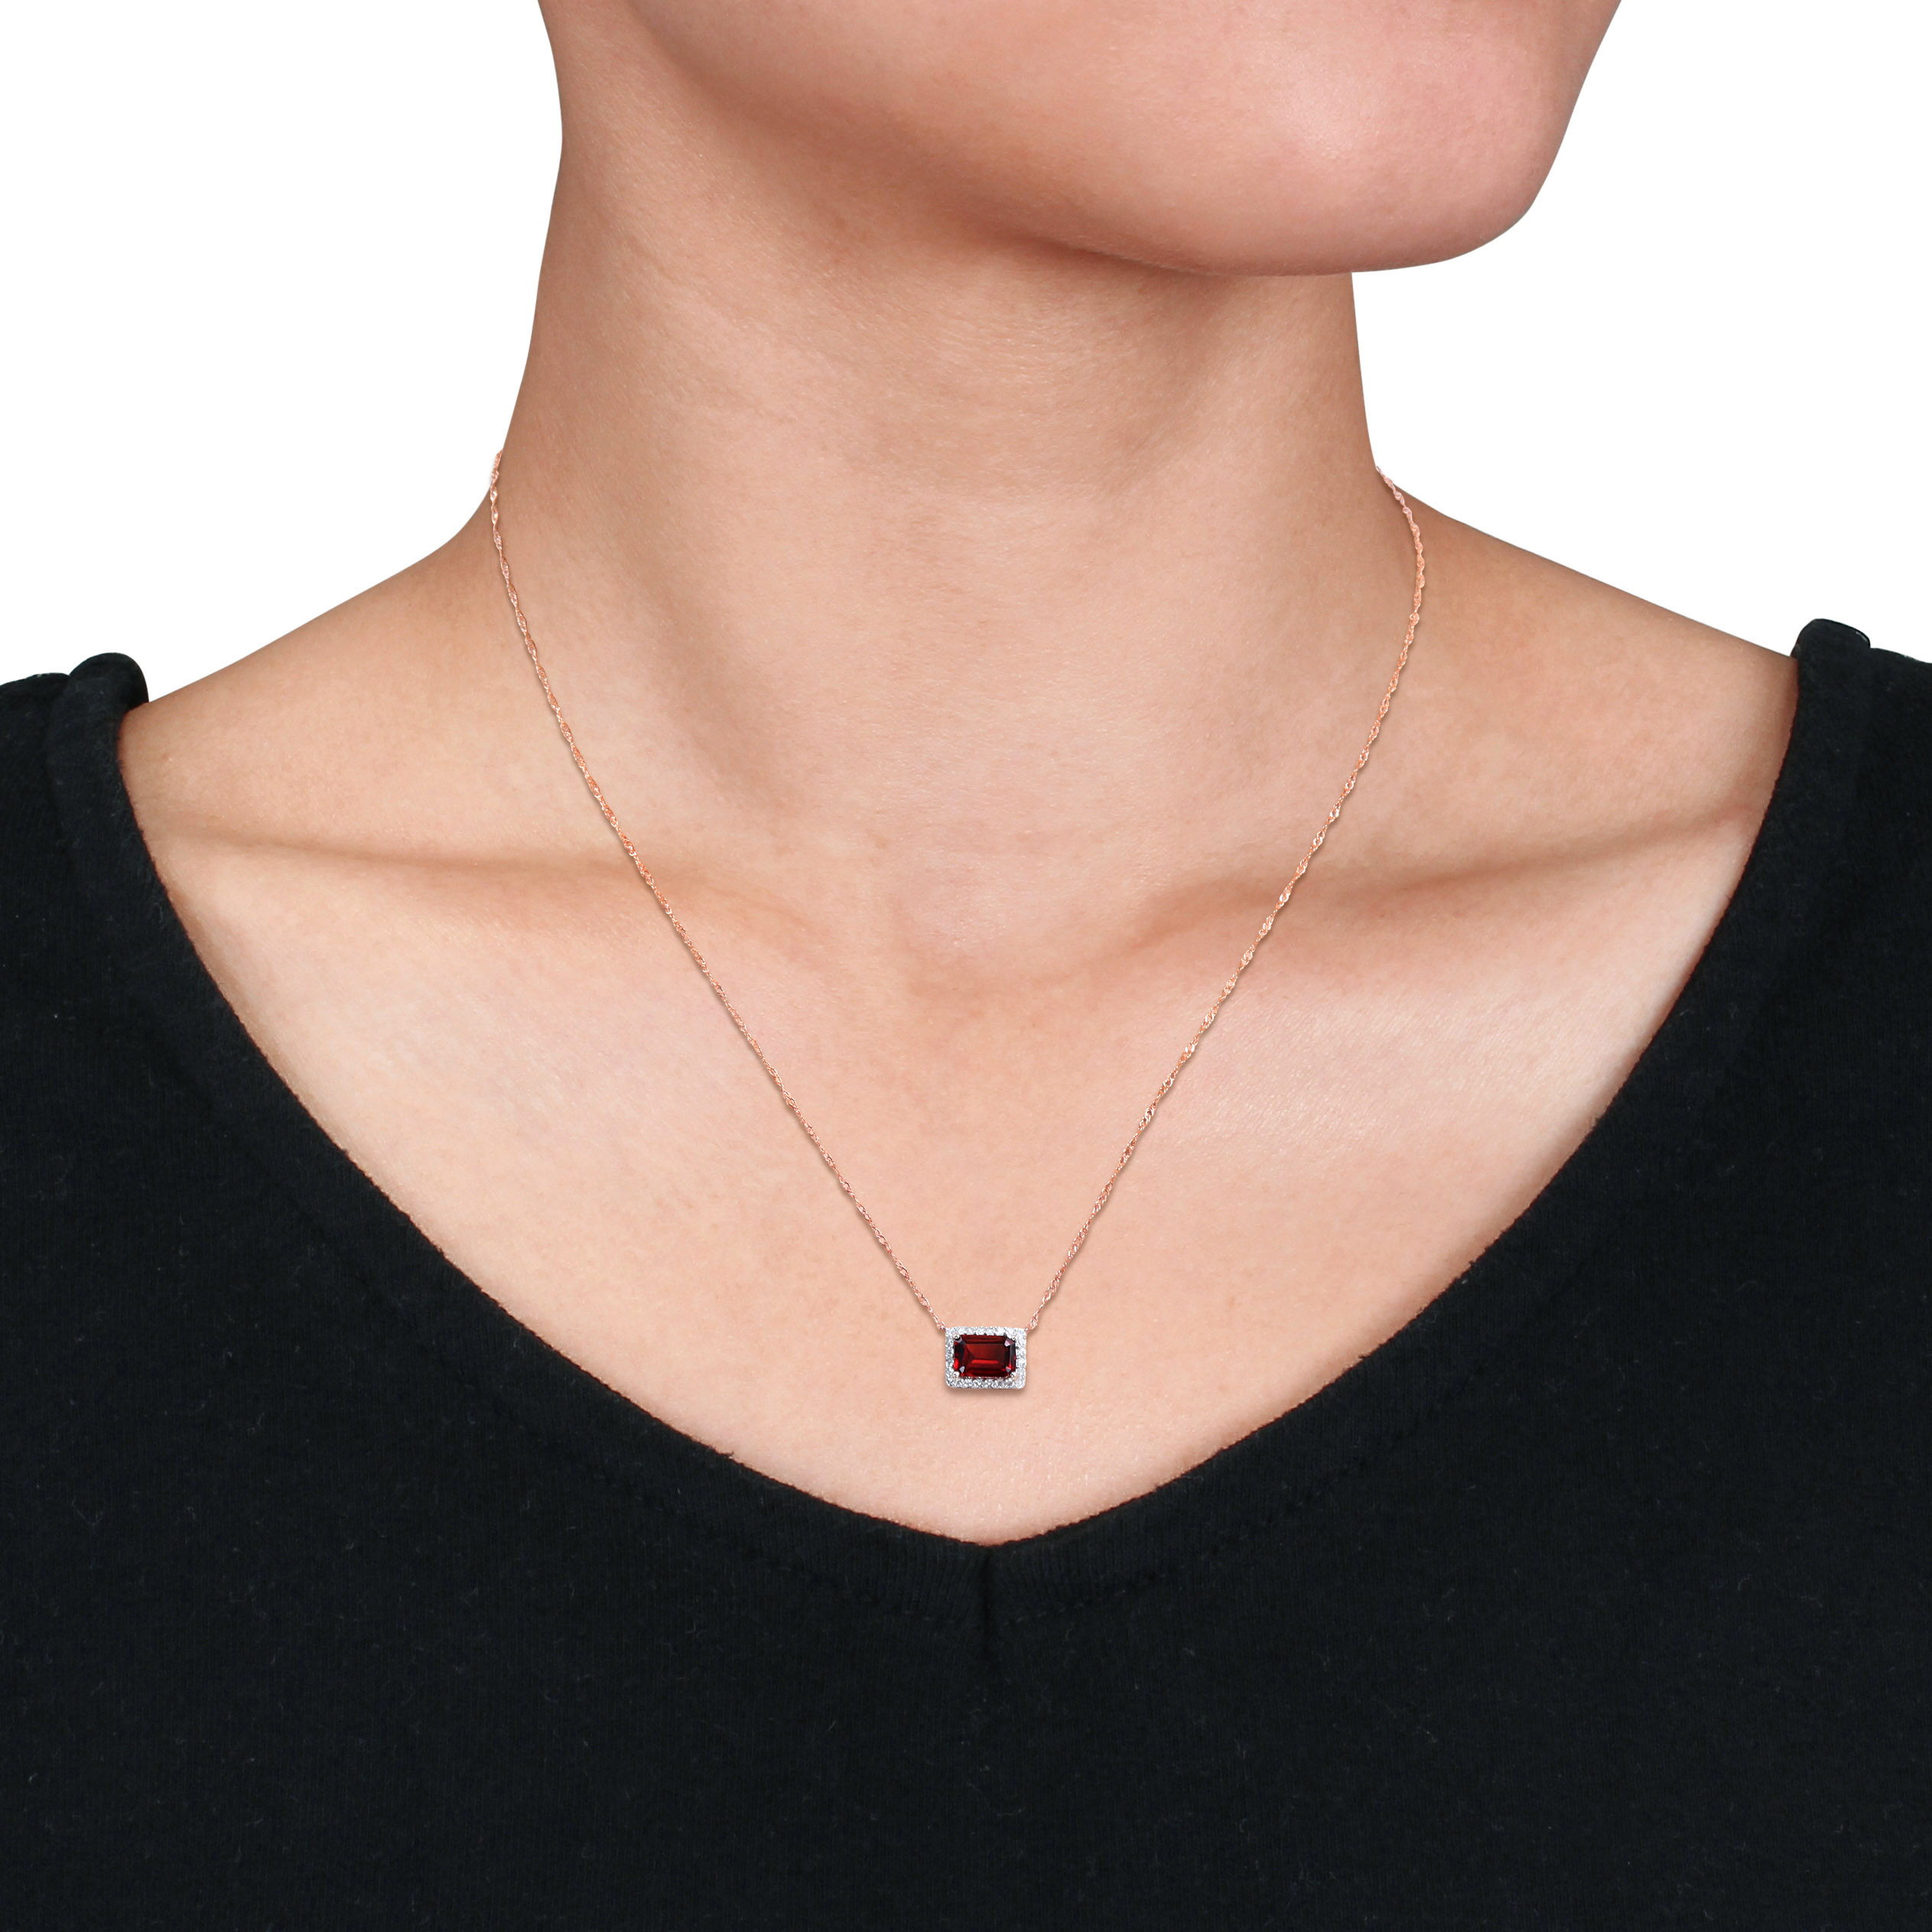 1 1/4 CT TGW Octagon Garnet and 1/8 CT TW Diamond Halo Necklace in 10k Rose Gold - 17 in.